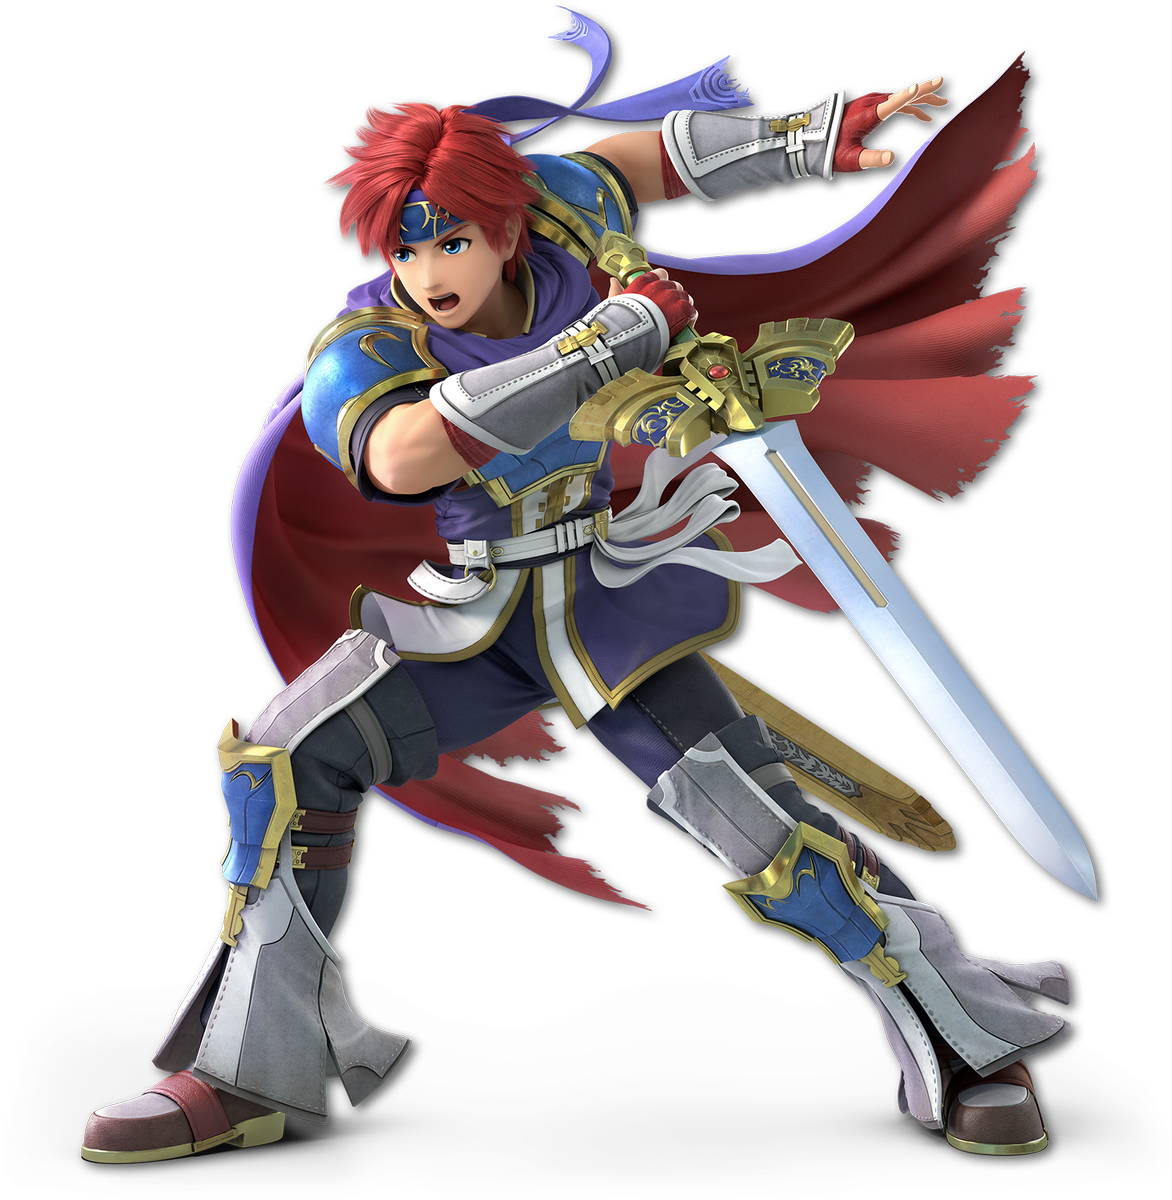 1 Reply 2 Retweets 6 Likes - Super Smash Bros Ultimate Roy (1172x1200)